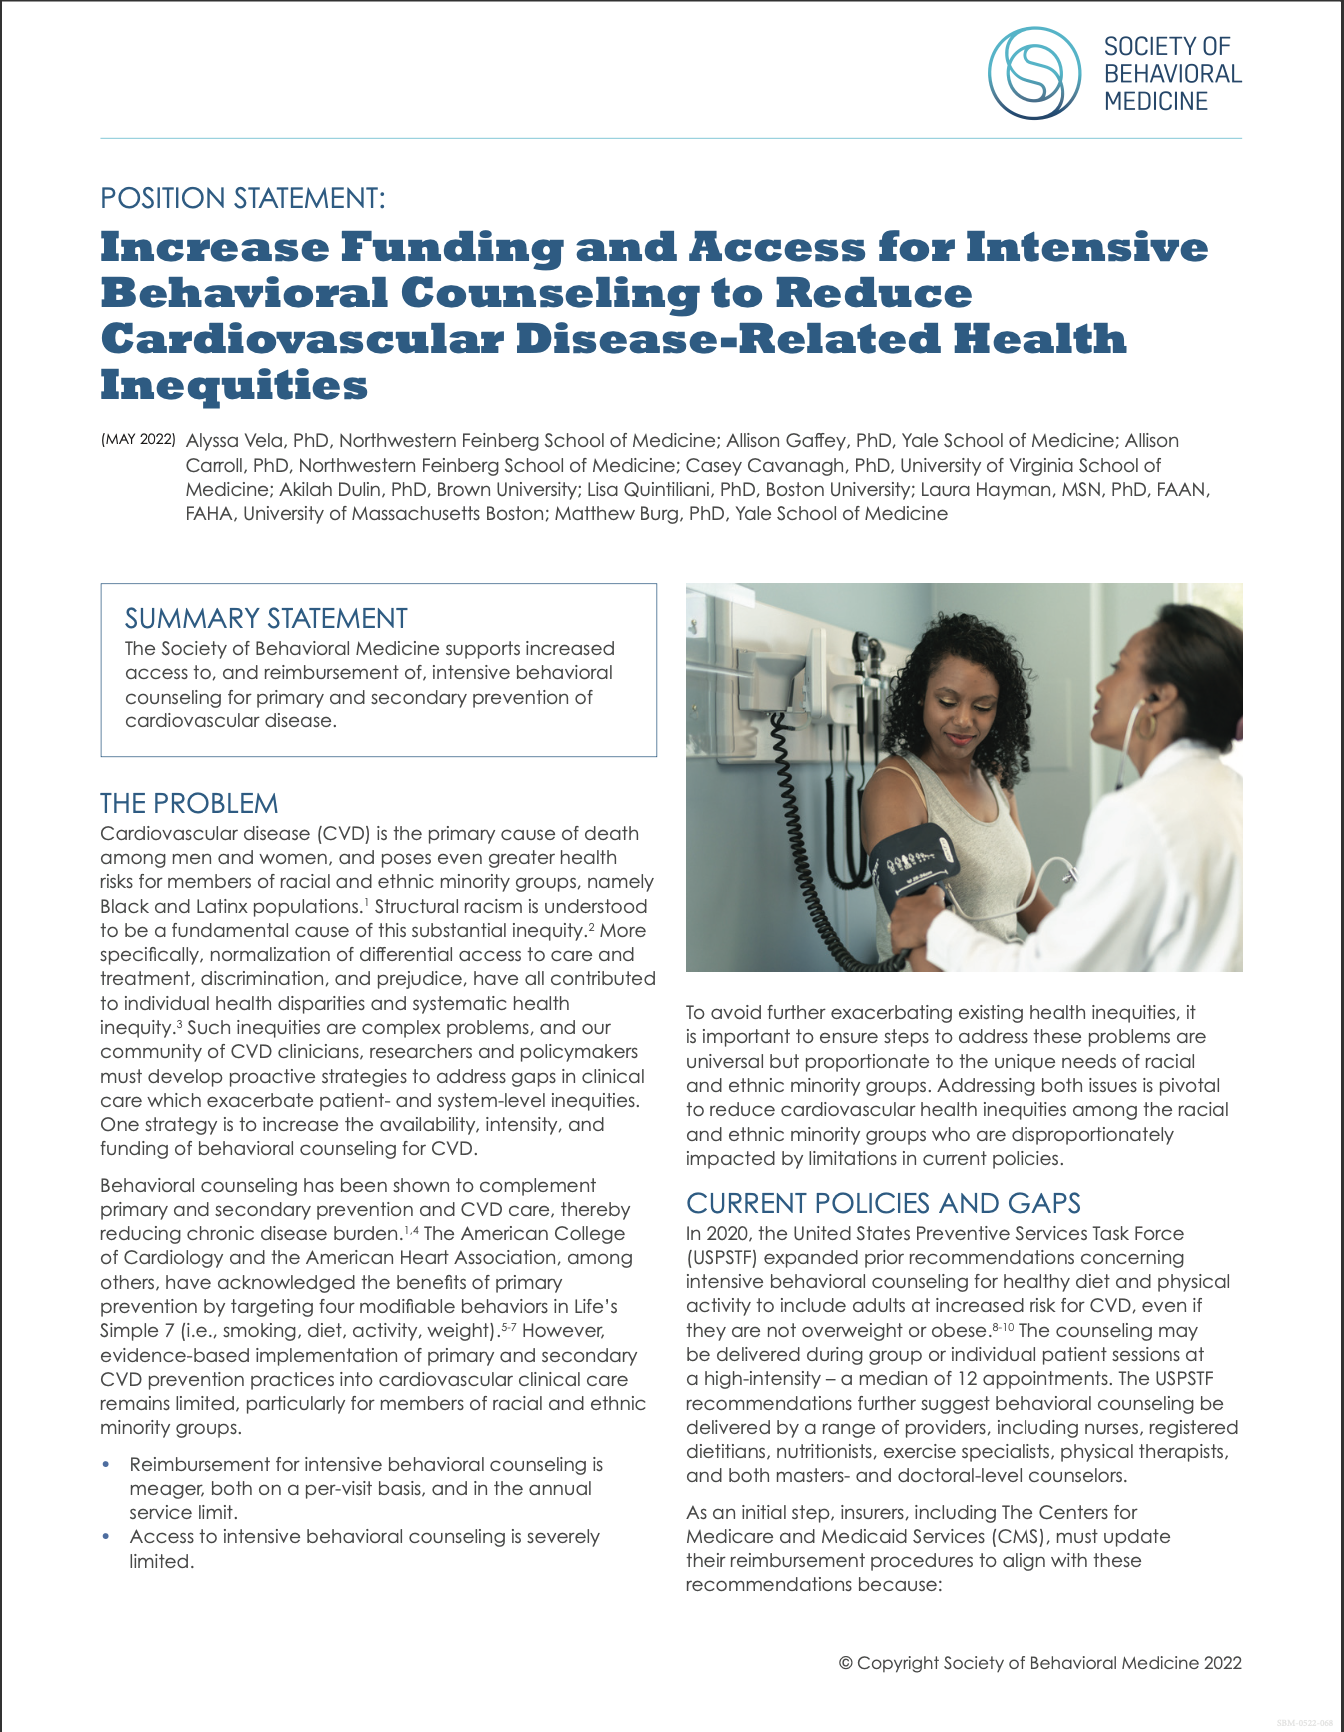 Increase Funding and Access for Intensive Behavioral Counseling to Reduce Cardiovascular Disease-Related Health Inequities 